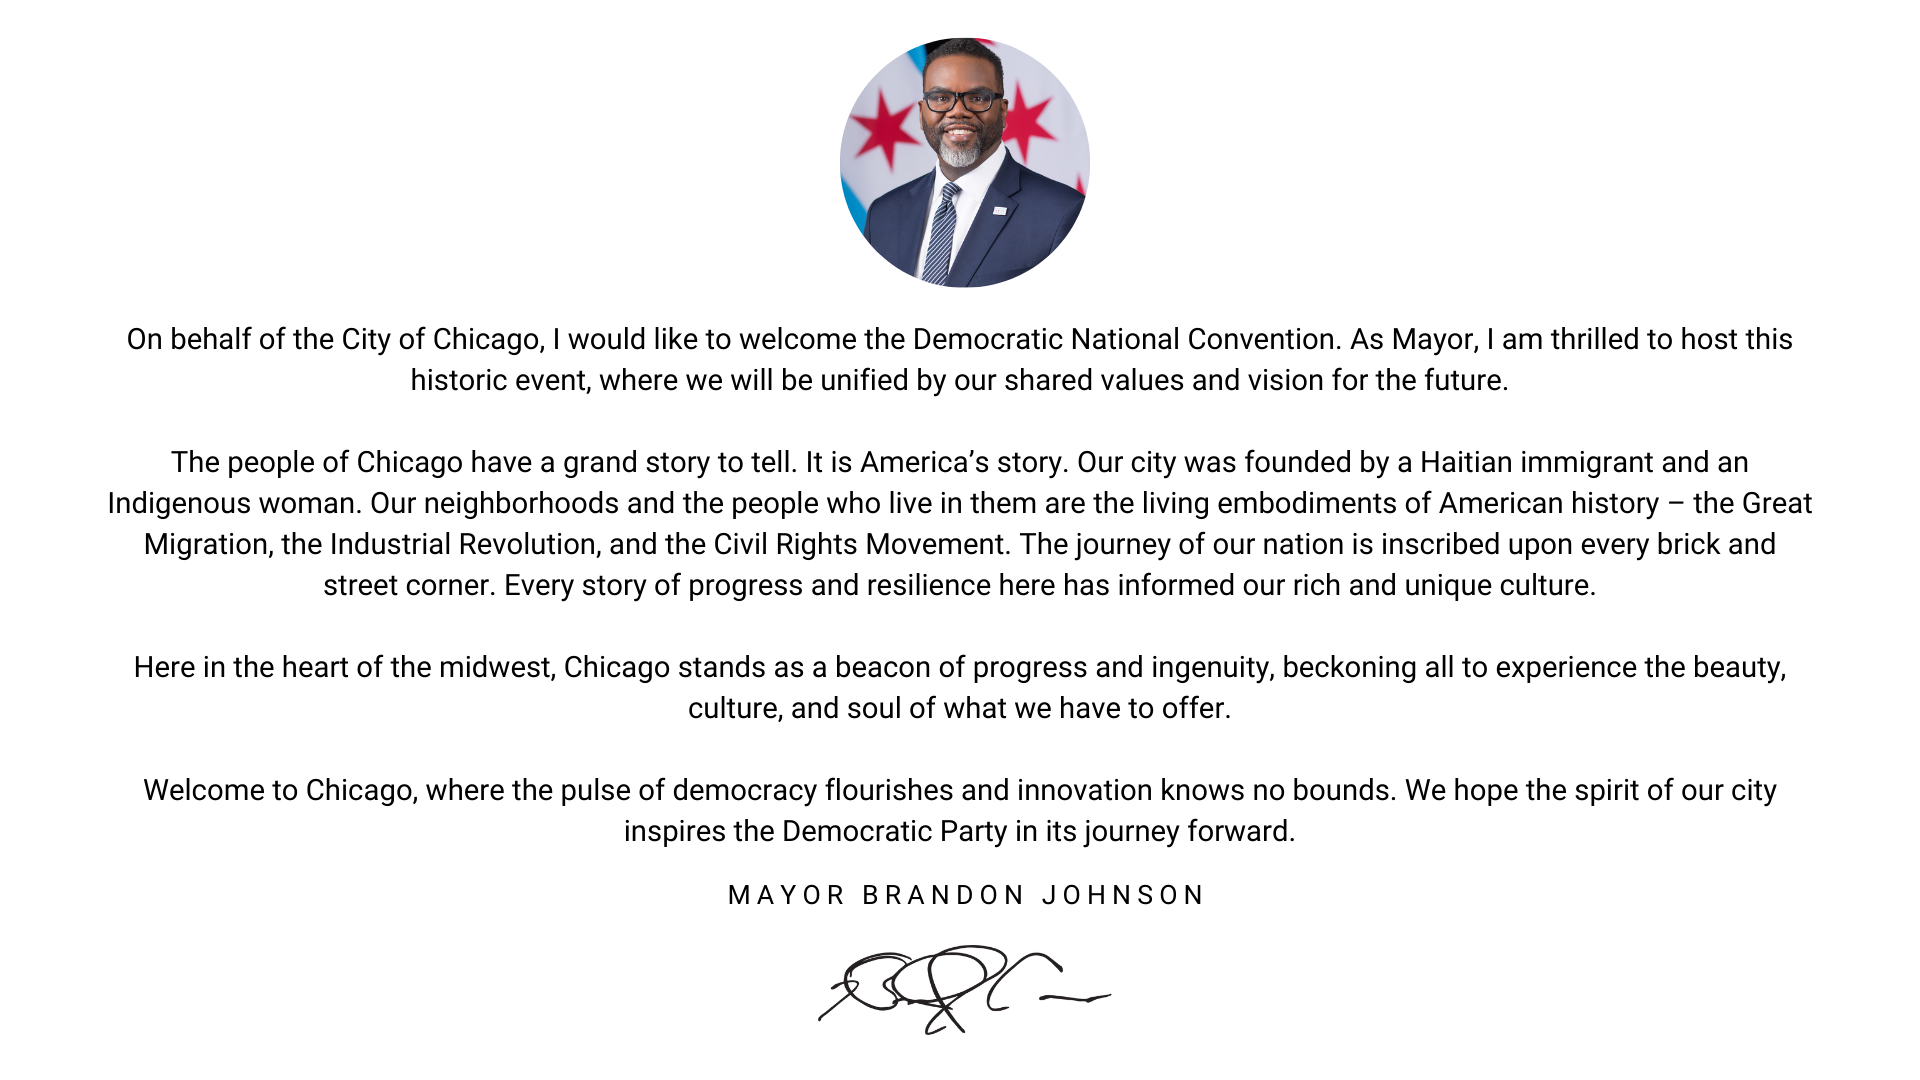 Message from the Mayor  On behalf of the City of Chicago, I would like to welcome the Democratic National Convention. As Mayor, I am thrilled to host this historic event, where we will be unified by our shared values and vision for the future.  The people of Chicago have a grand story to tell. It is America’s story. Our city was founded by a Haitian immigrant and an Indigenous woman. Our neighborhoods and the people who live in them are the living embodiments of American history – the Great Migration, the Industrial Revolution, and the Civil Rights Movement. The journey of our nation is inscribed upon every brick and street corner. Every story of progress and resilience here has informed our rich and unique culture.  Here in the heart of the midwest, Chicago stands as a beacon of progress and ingenuity, beckoning all to experience the beauty, culture, and soul of what we have to offer.  Welcome to Chicago, where the pulse of democracy flourishes and innovation knows no bounds. We hope the spirit of our city inspires the Democratic Party in its journey forward.